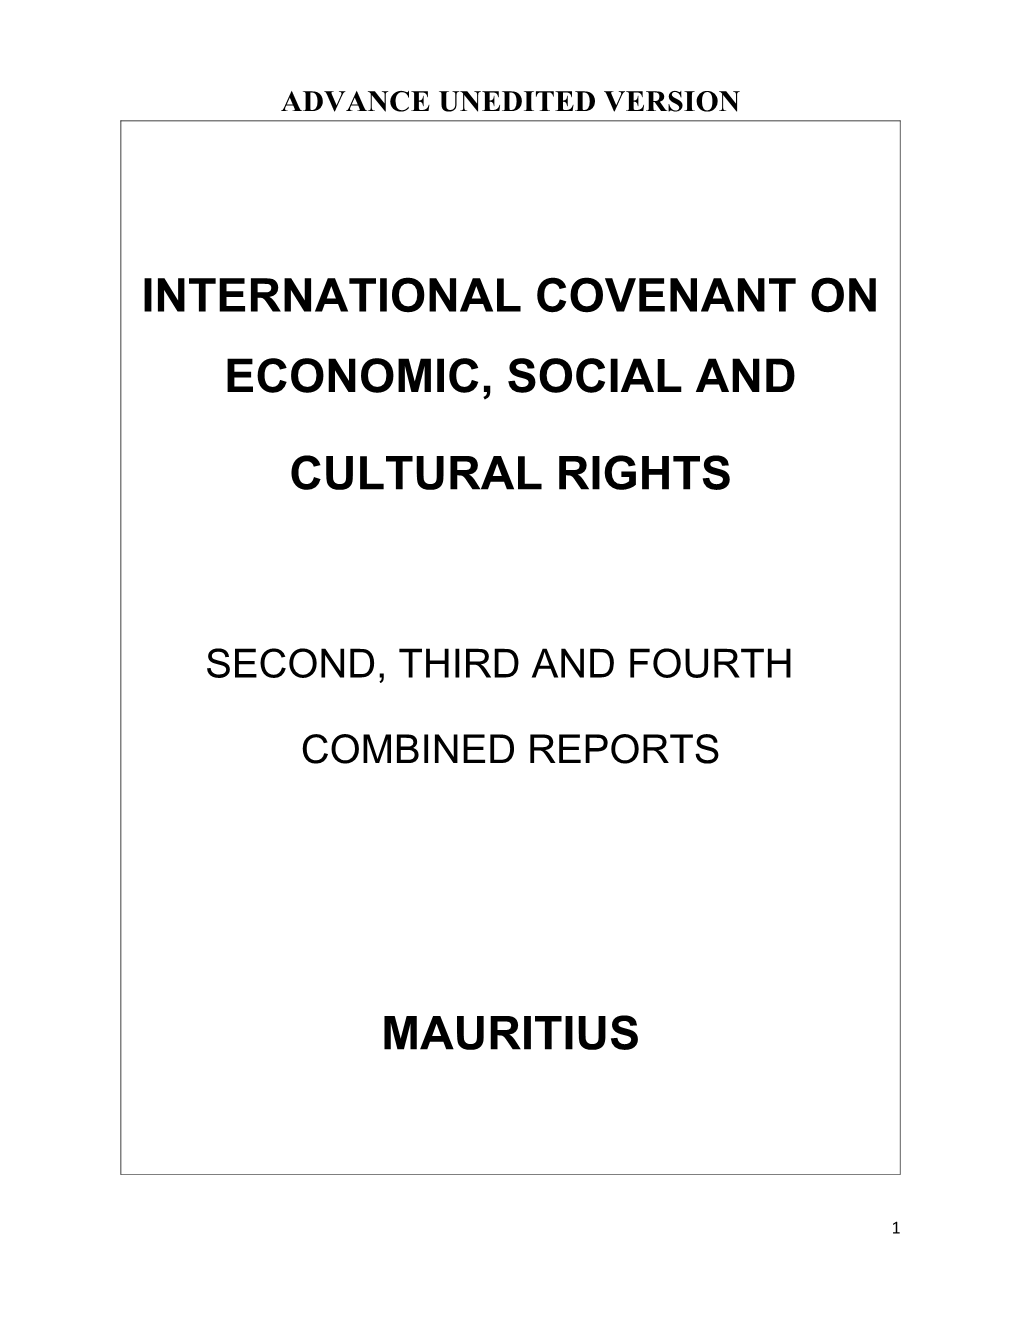 International Covenant on Economic, Social And